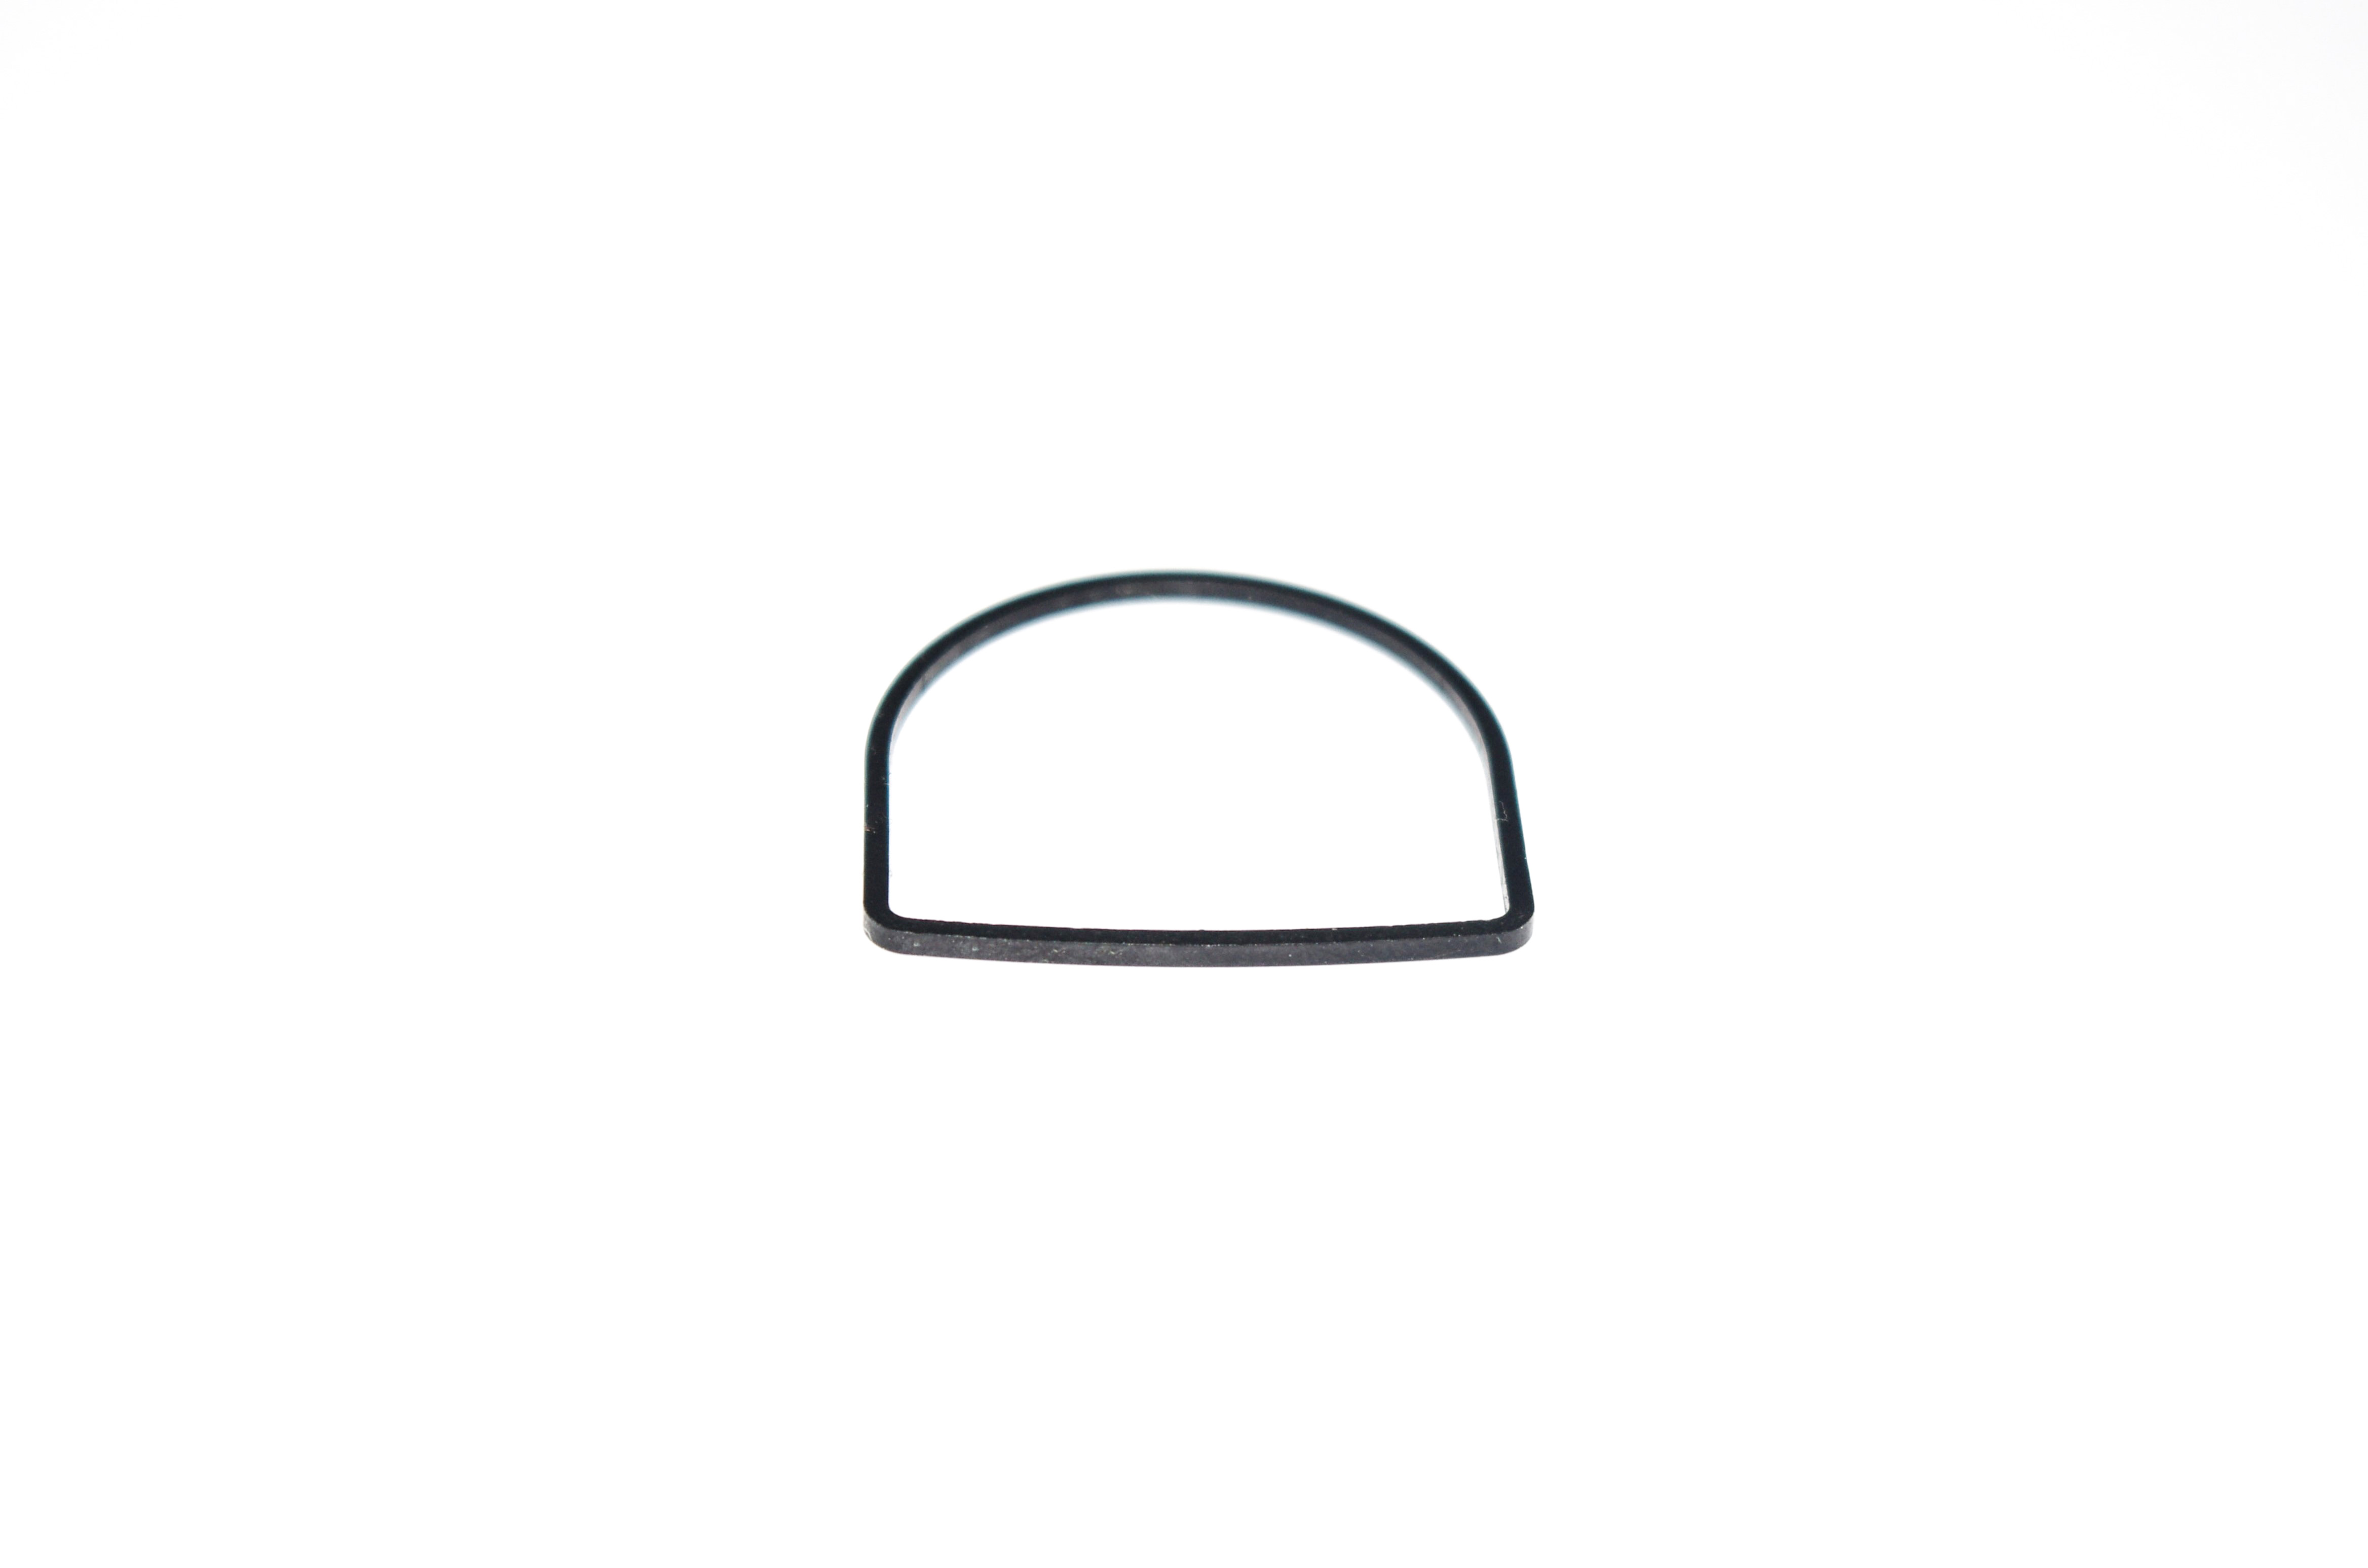 OEM Cosmetic Ring: Headswitch - BF-1T180, BF-P180, BF-Q180